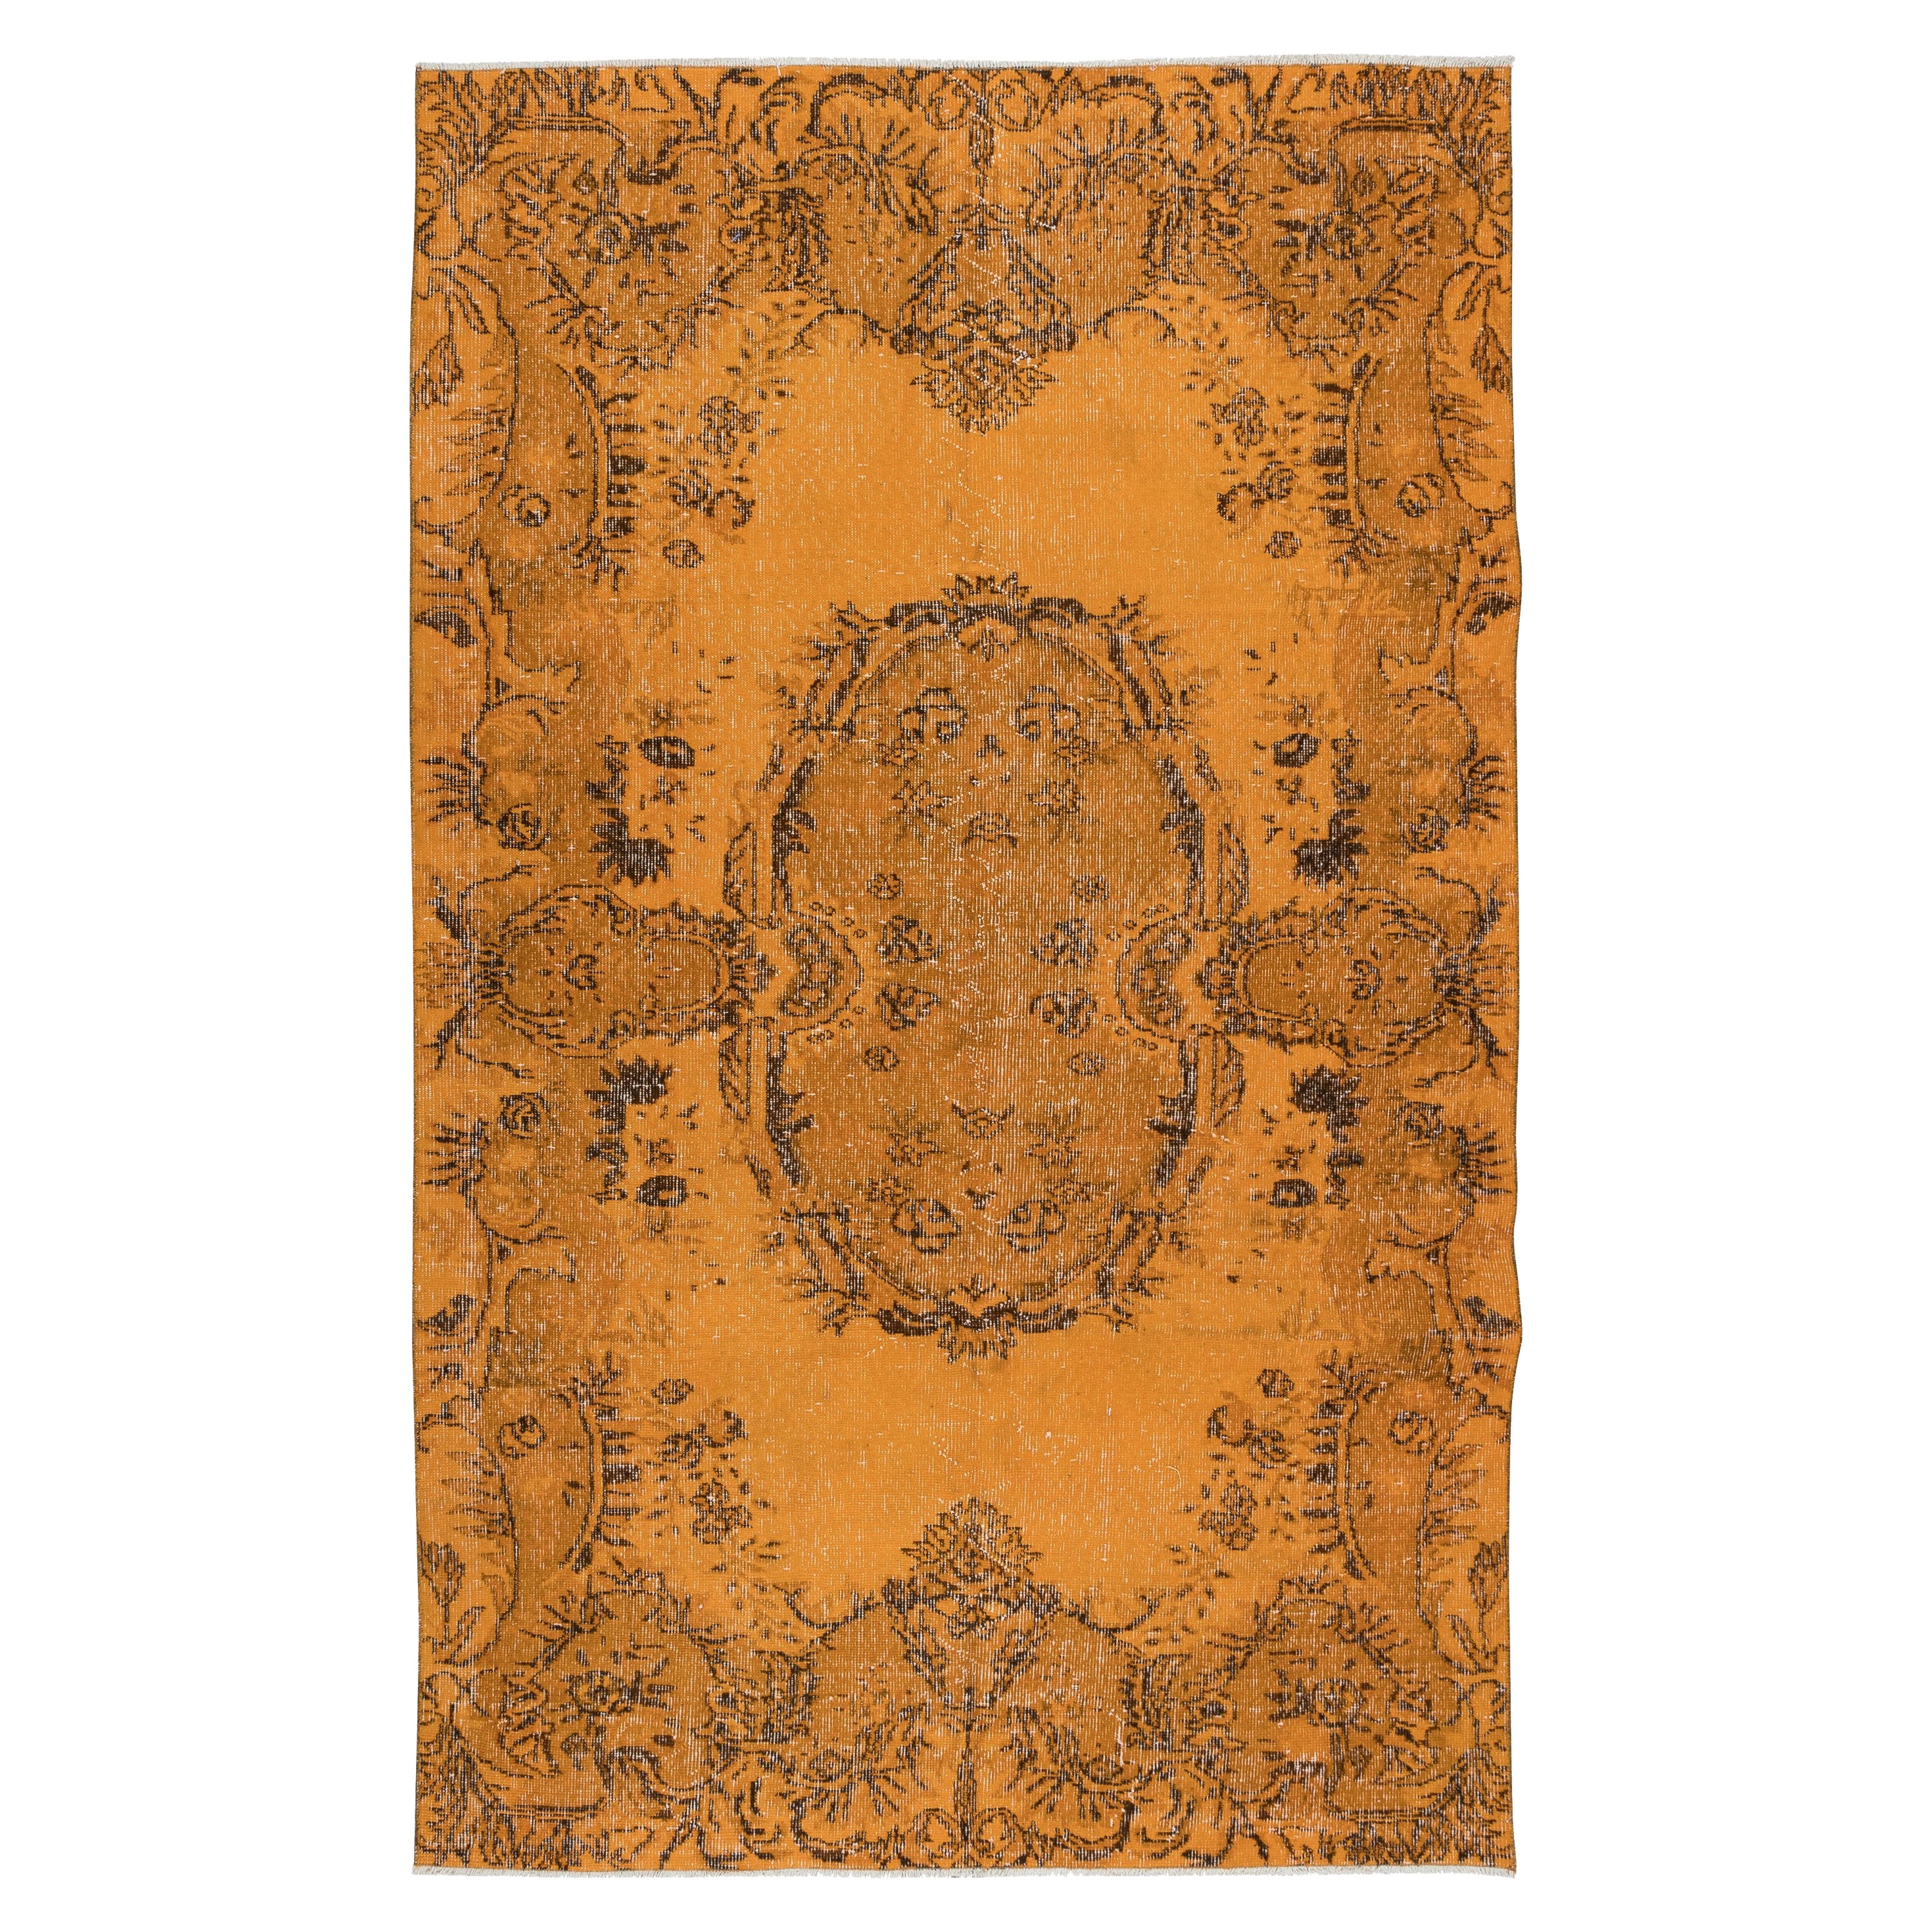 5.2x8.4 Ft French Aubusson Inspired Orange Area Rug, Handknotted in Turkey For Sale